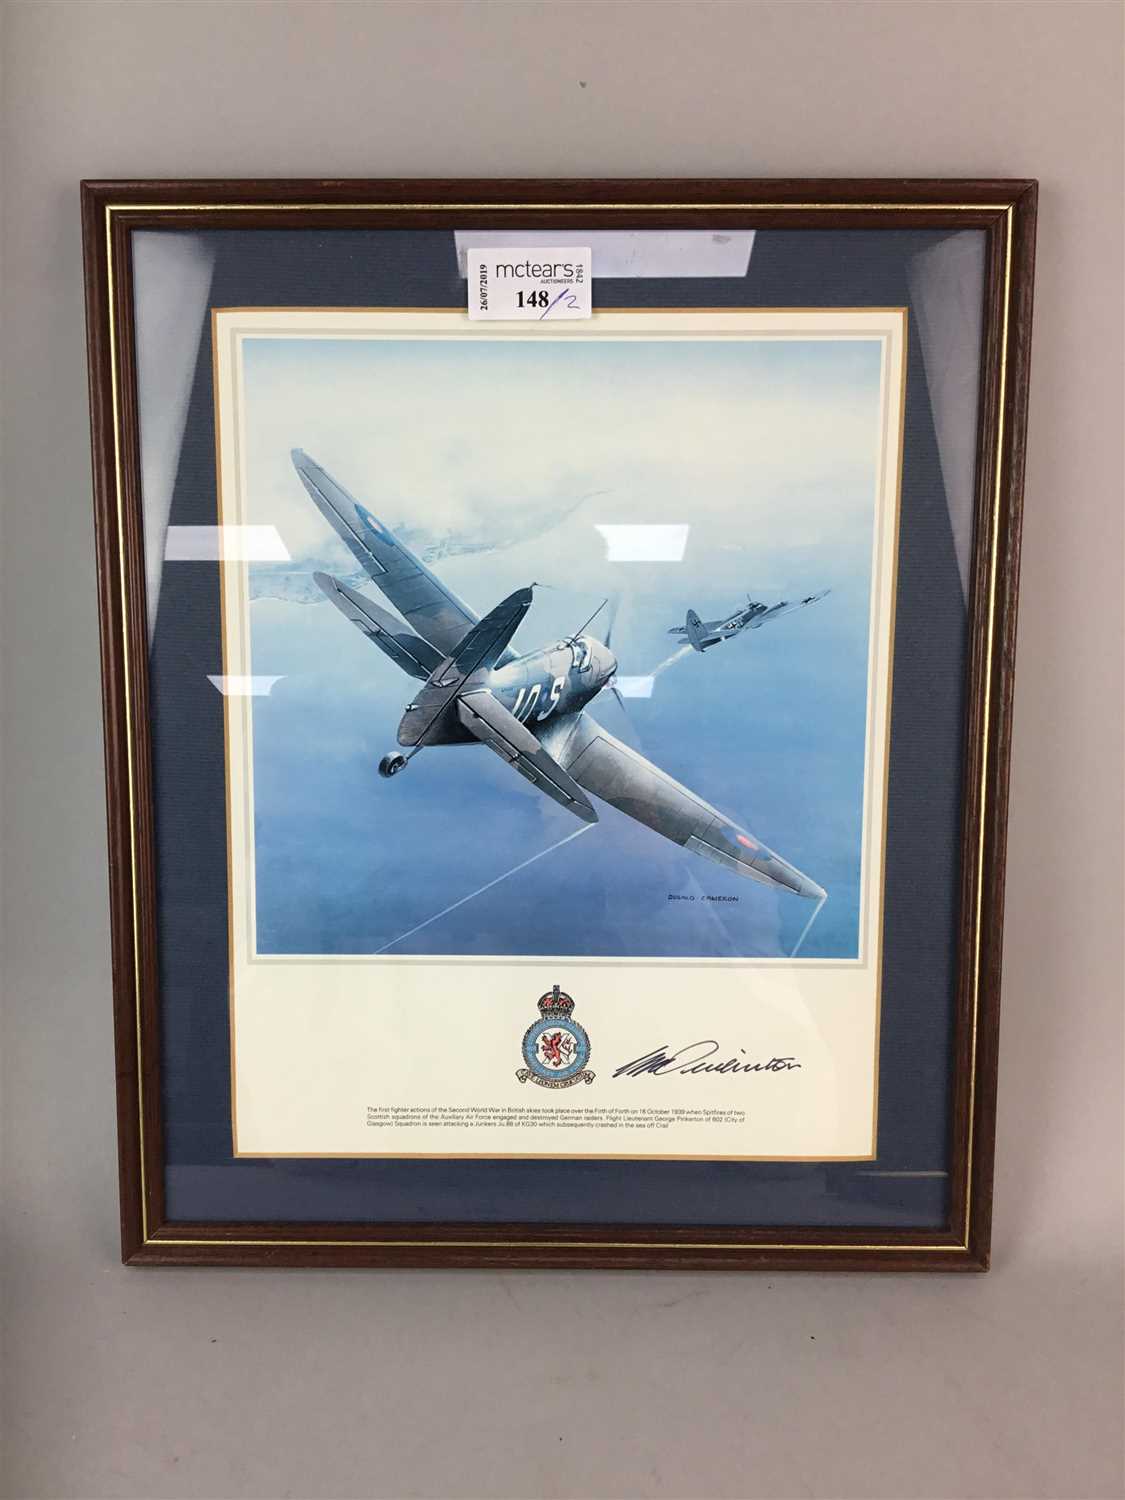 Lot 148 - SPITFIRES OVER FIRTH OF FORTH, A PRINT AFTER DUGALD CAMERON